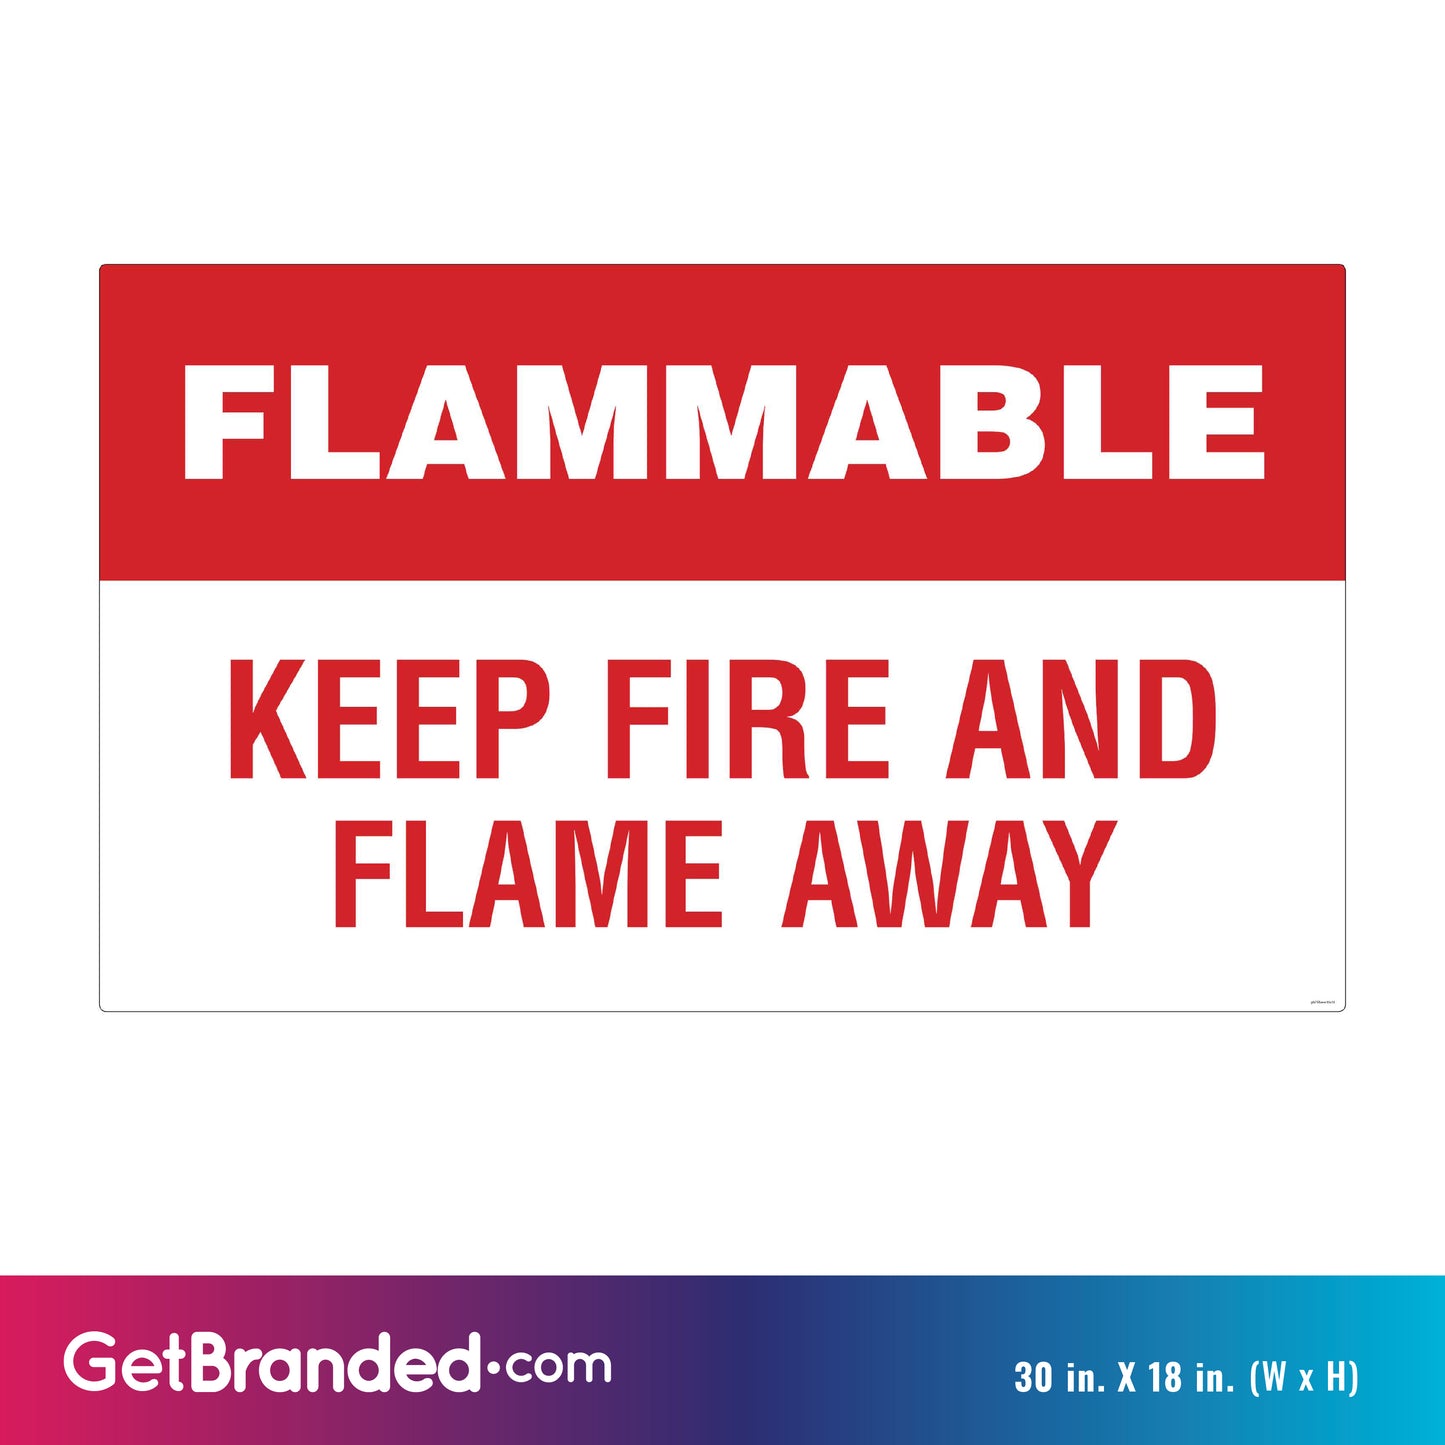 Flammable - Keep Fire And Flame Away Decal  size guide.